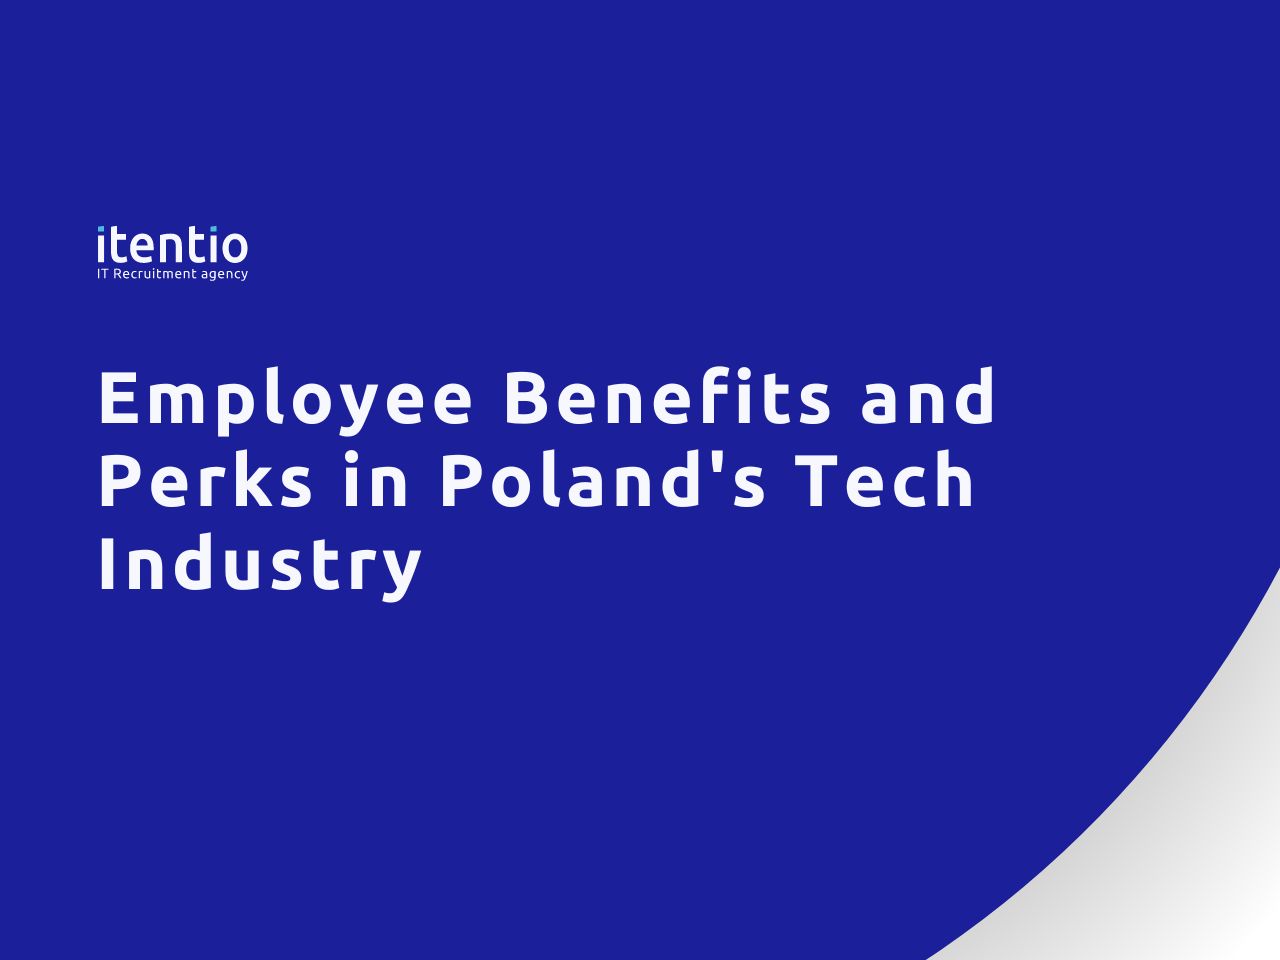 Employee Benefits and Perks in Poland's Tech Industry.